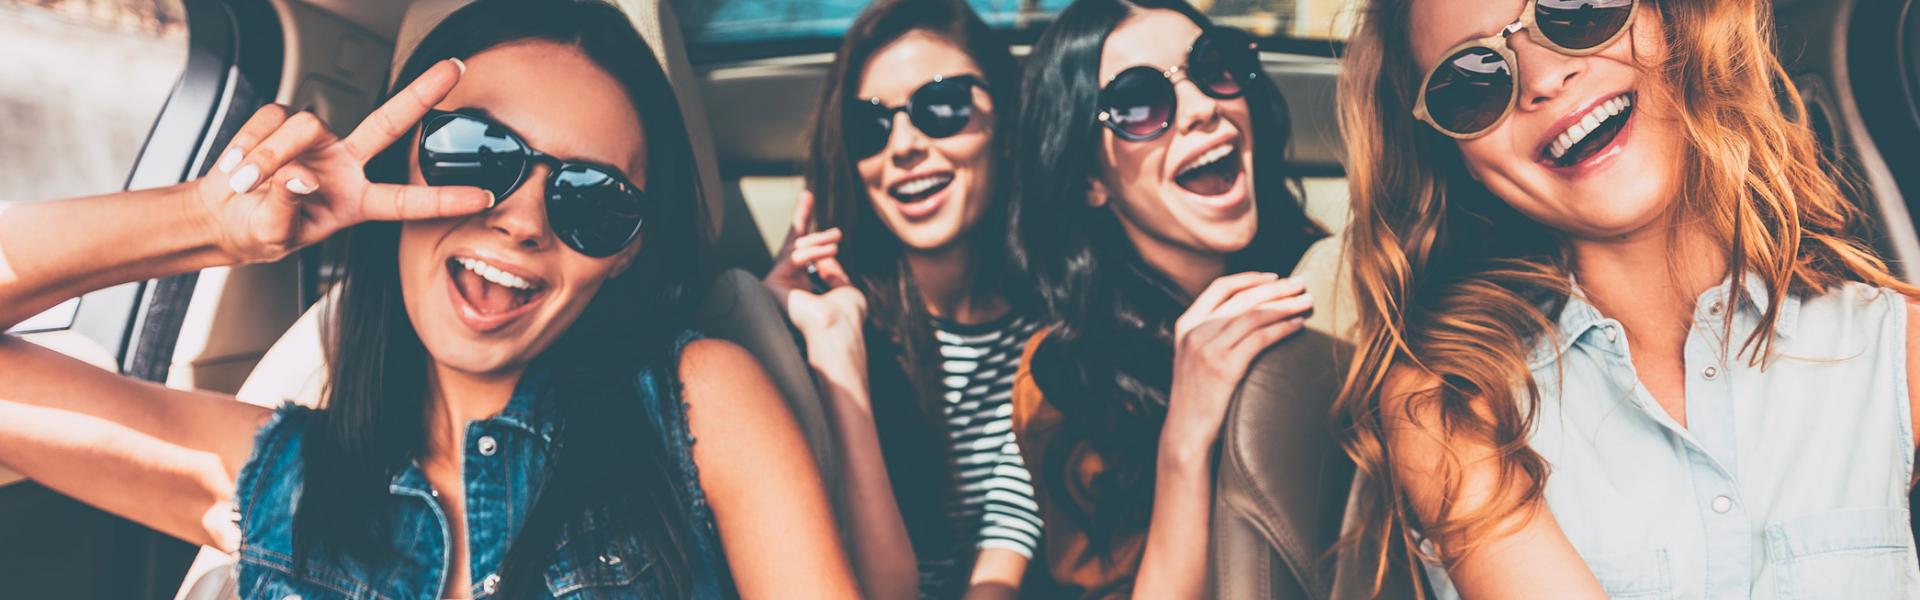 Hen and Stag Weekends in Liverpool - HomeToGo